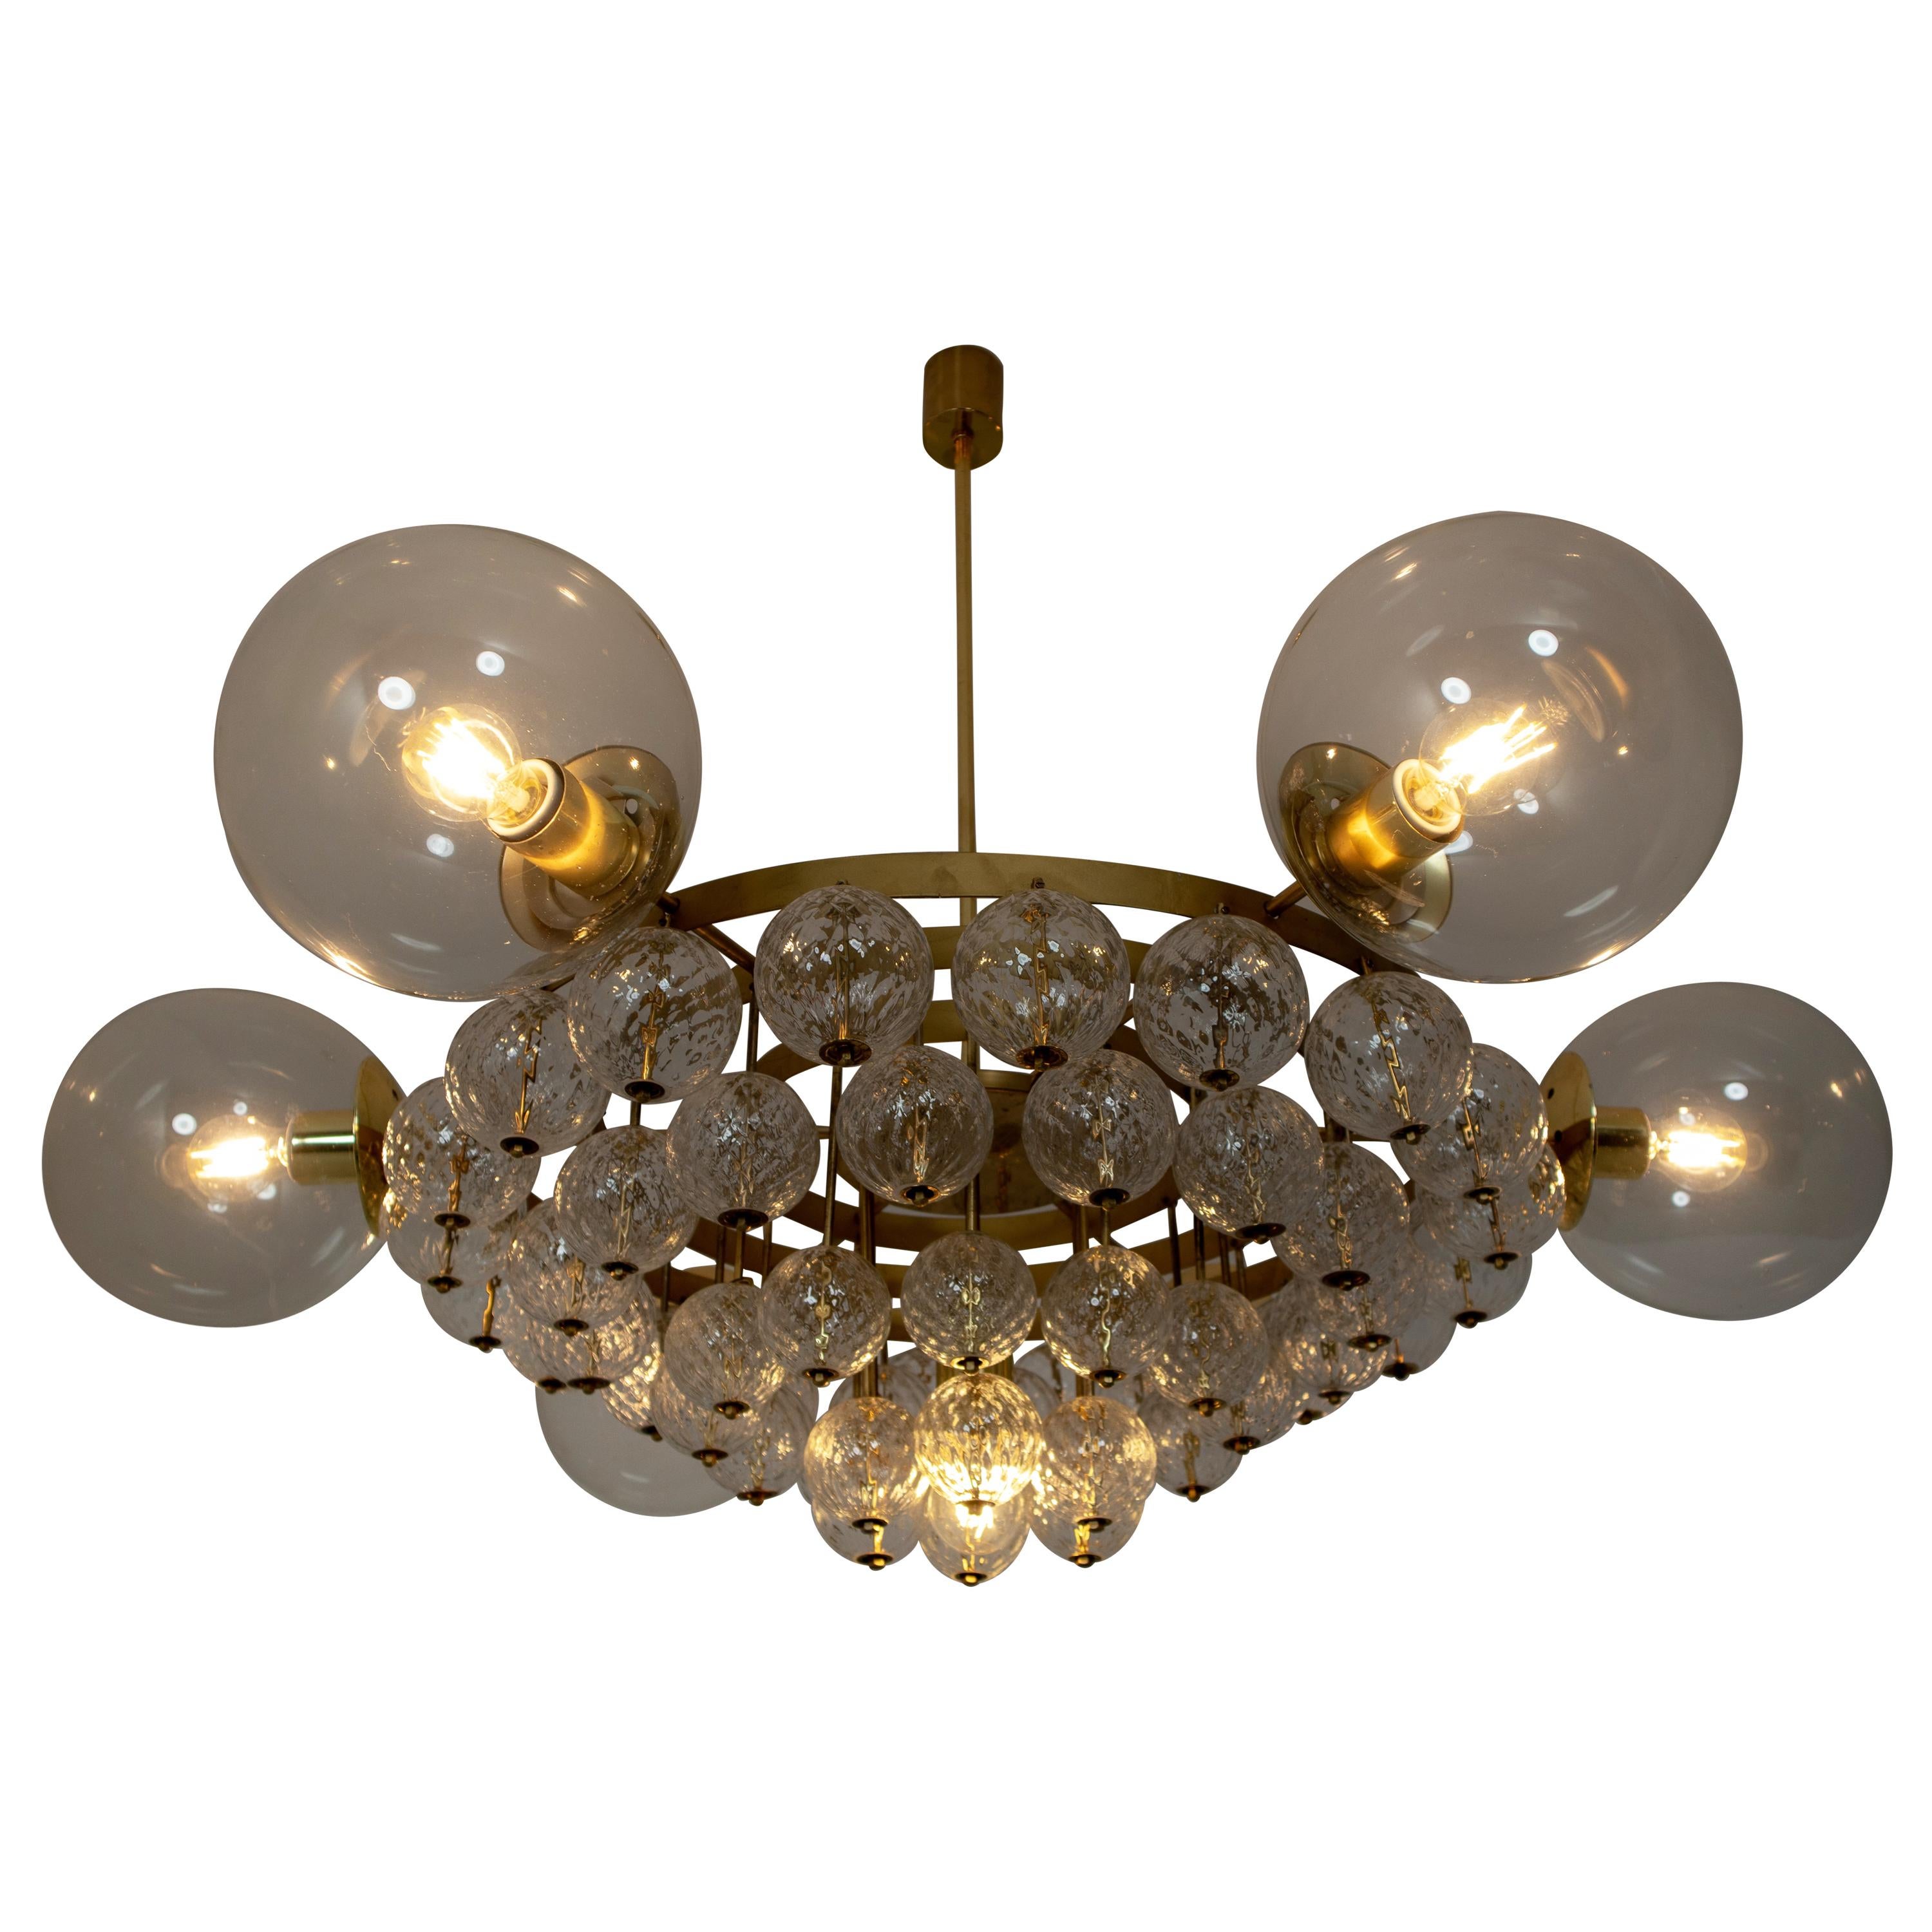 Large Mid-Century Chandelier with Brass Fixture and Structured Glass Globes